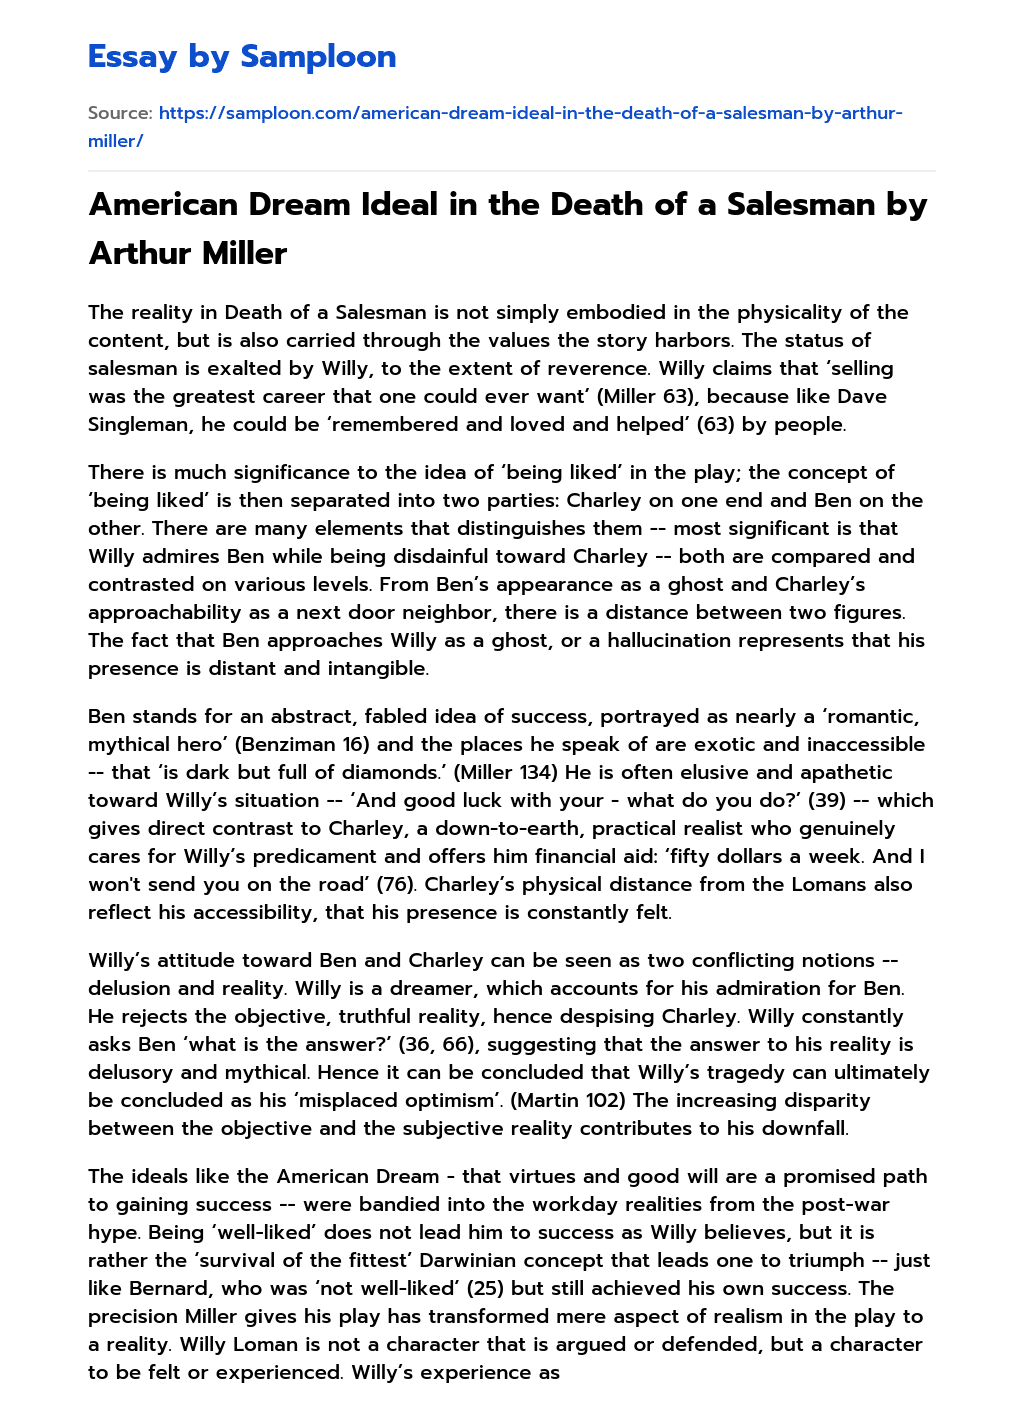 American Dream Ideal in the Death of a Salesman by Arthur Miller essay